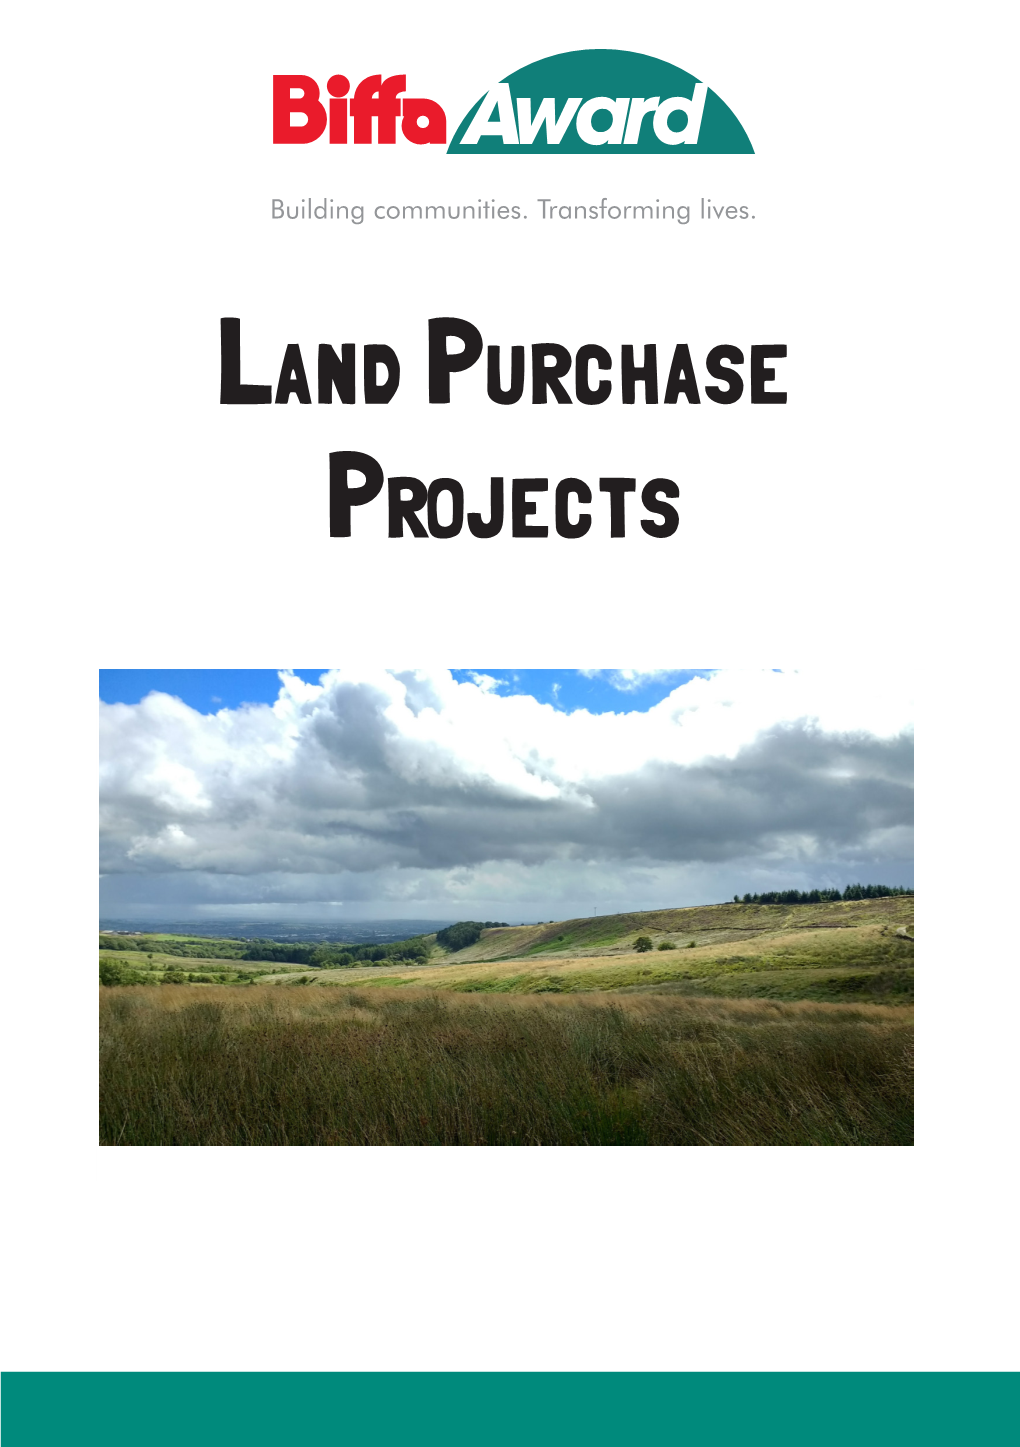 Land Purchase Projects Introduction